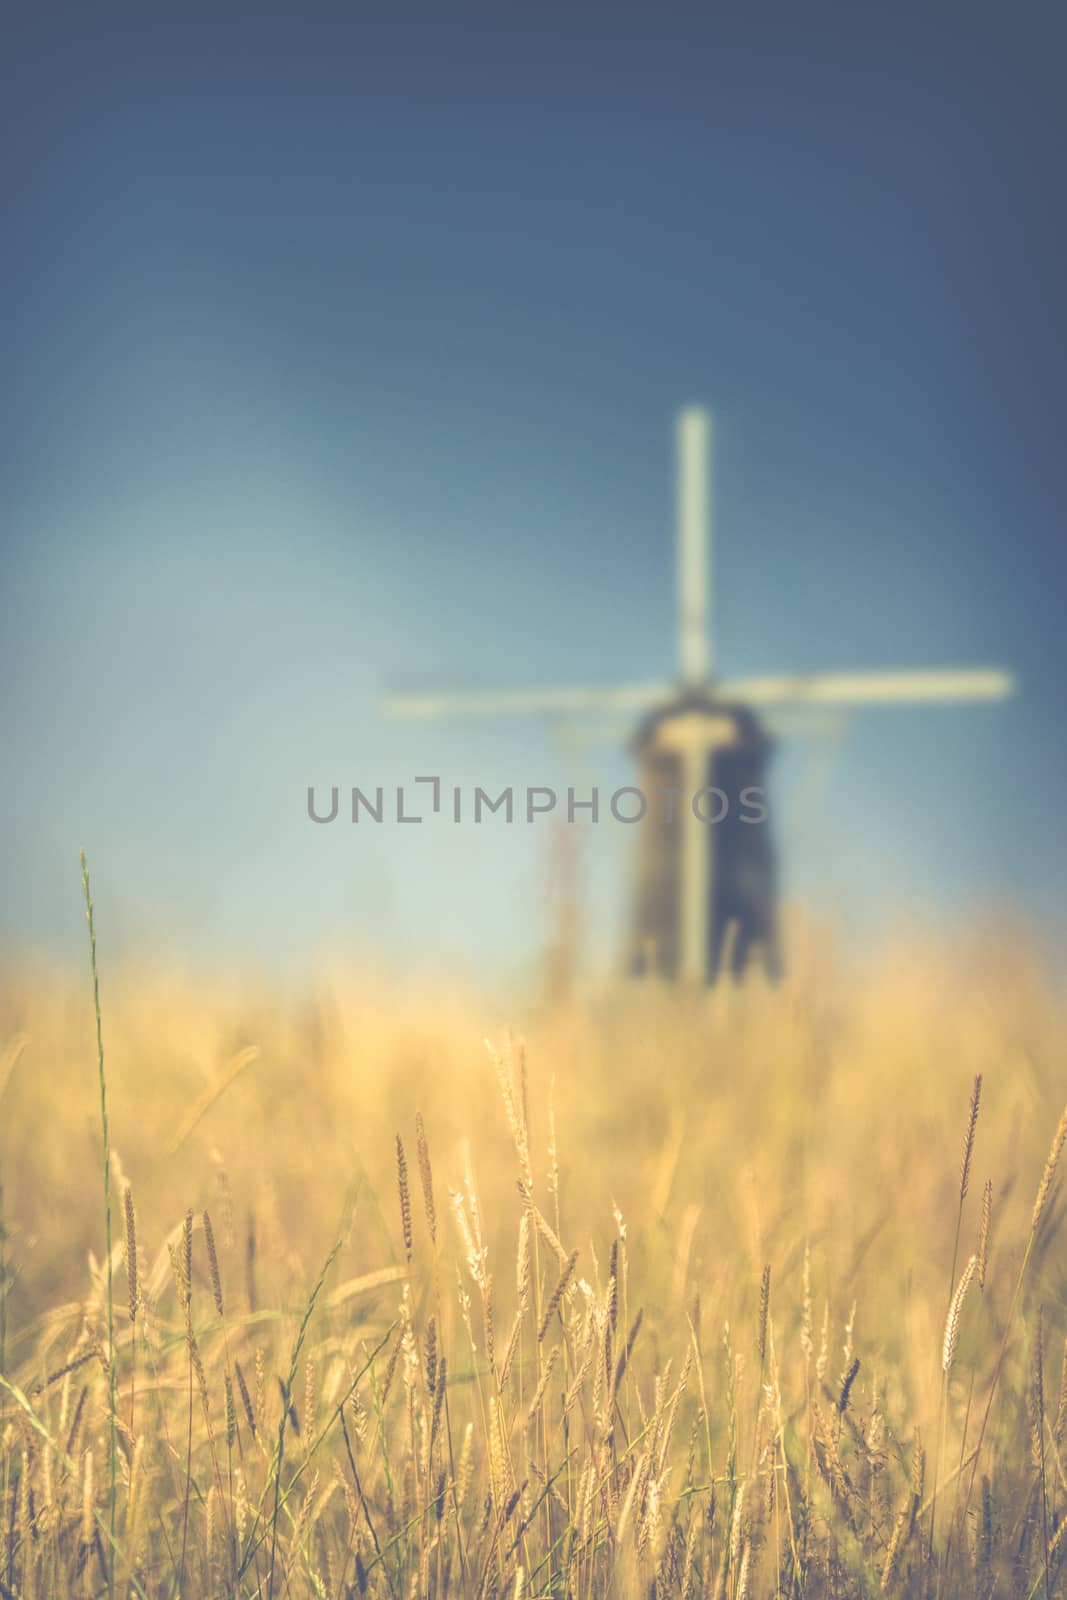 Retro Vintage Style Wheat Field With A Windmill In The Background With Shallow DoF